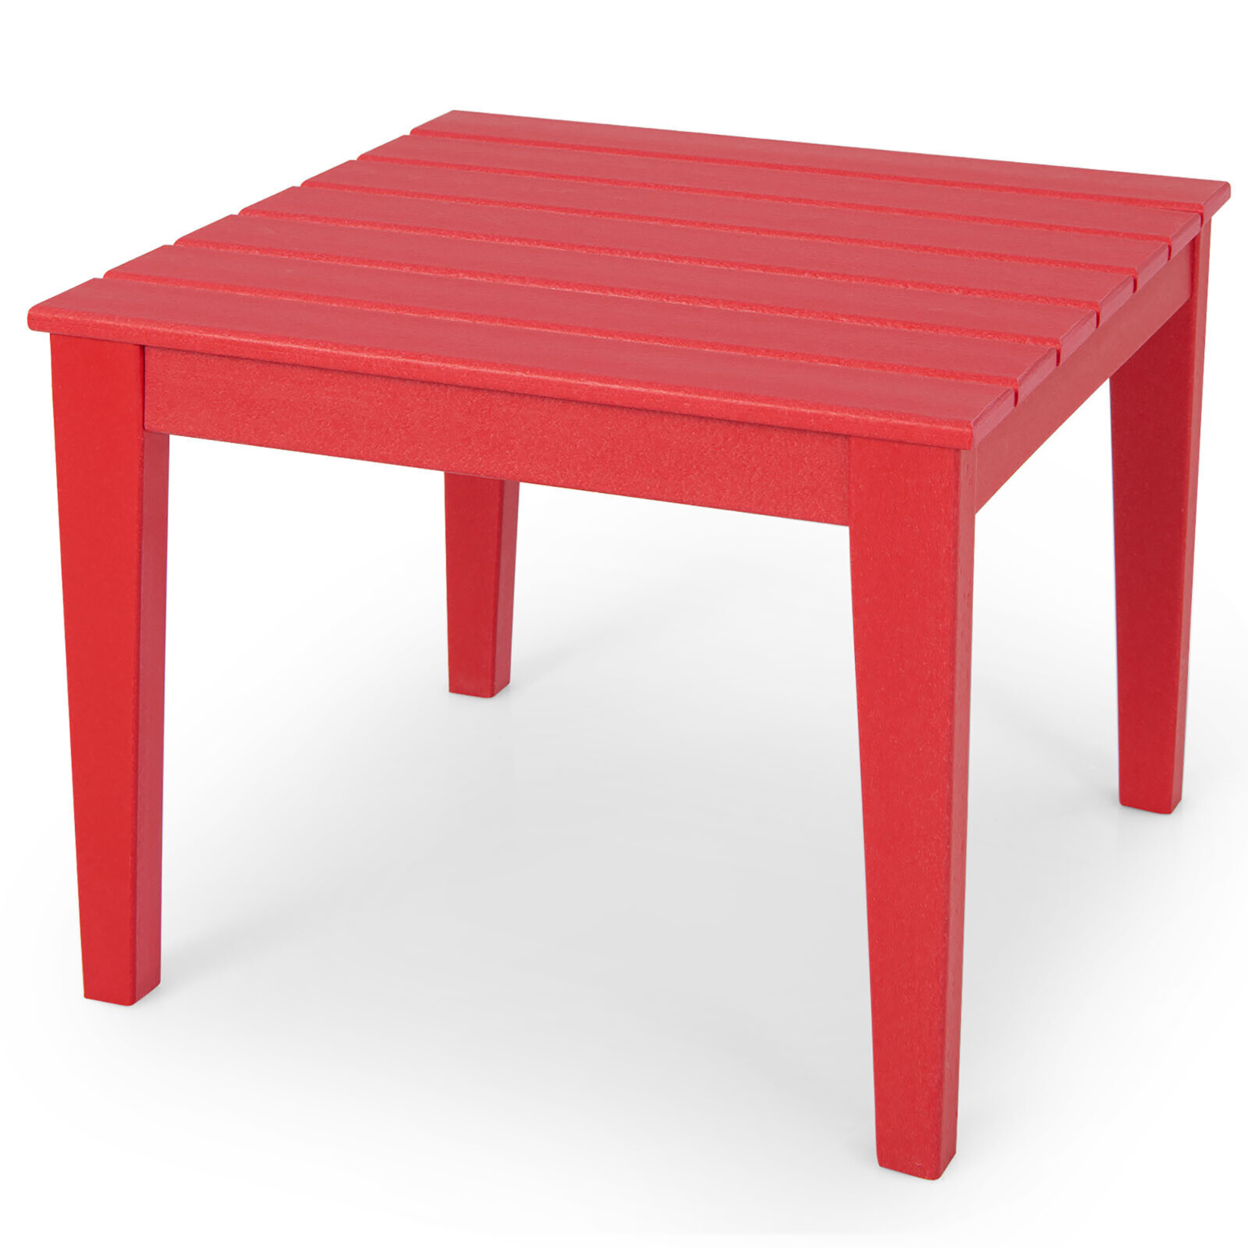 Kids Square Table Indoor Outdoor Heavy-Duty All-Weather Activity Play Table - Red